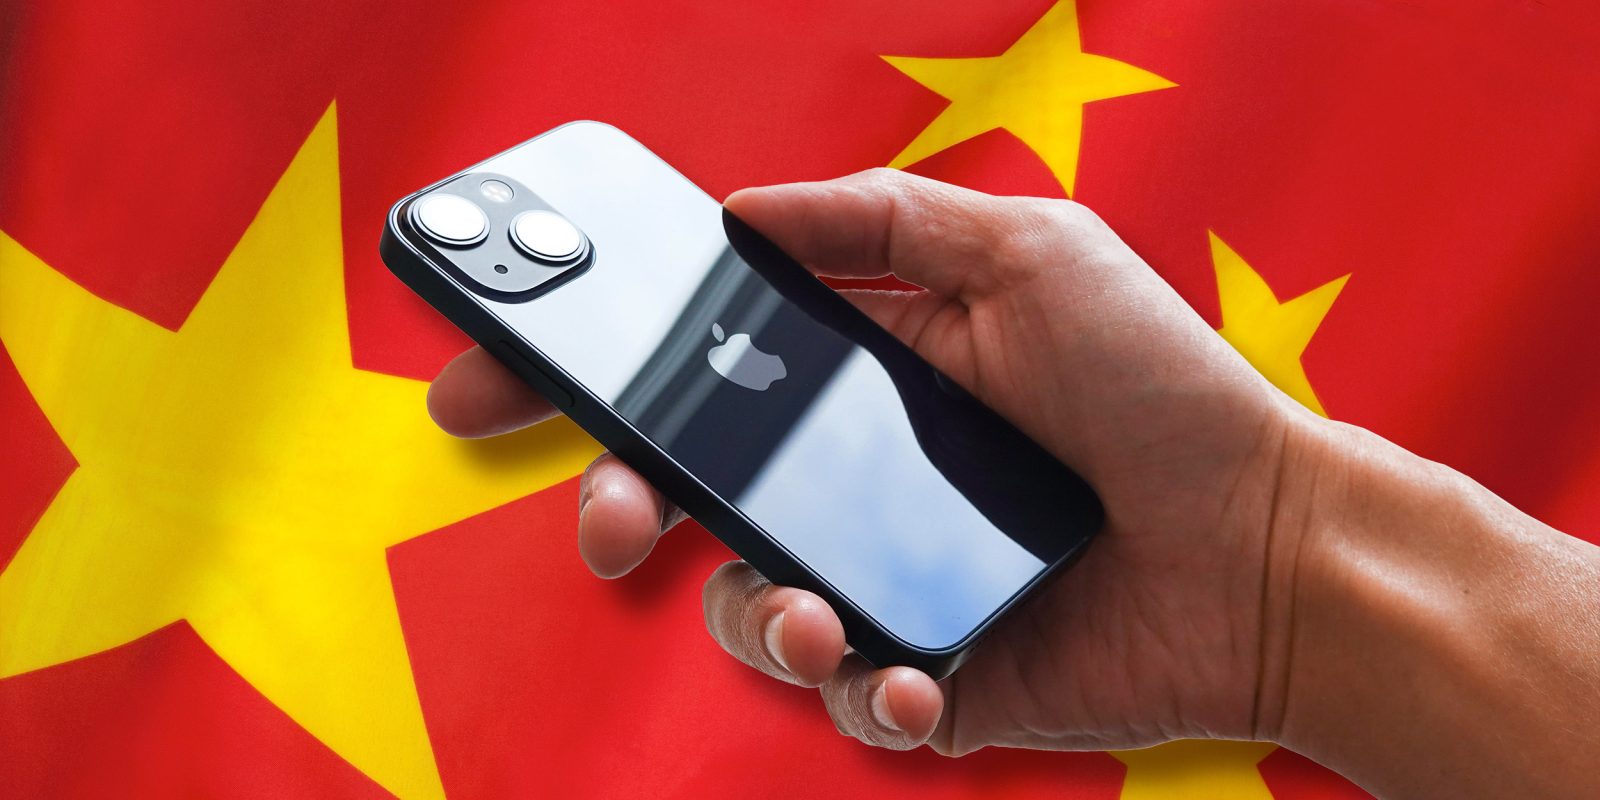 China bans government officials from using iPhones at work - 9to5Mac